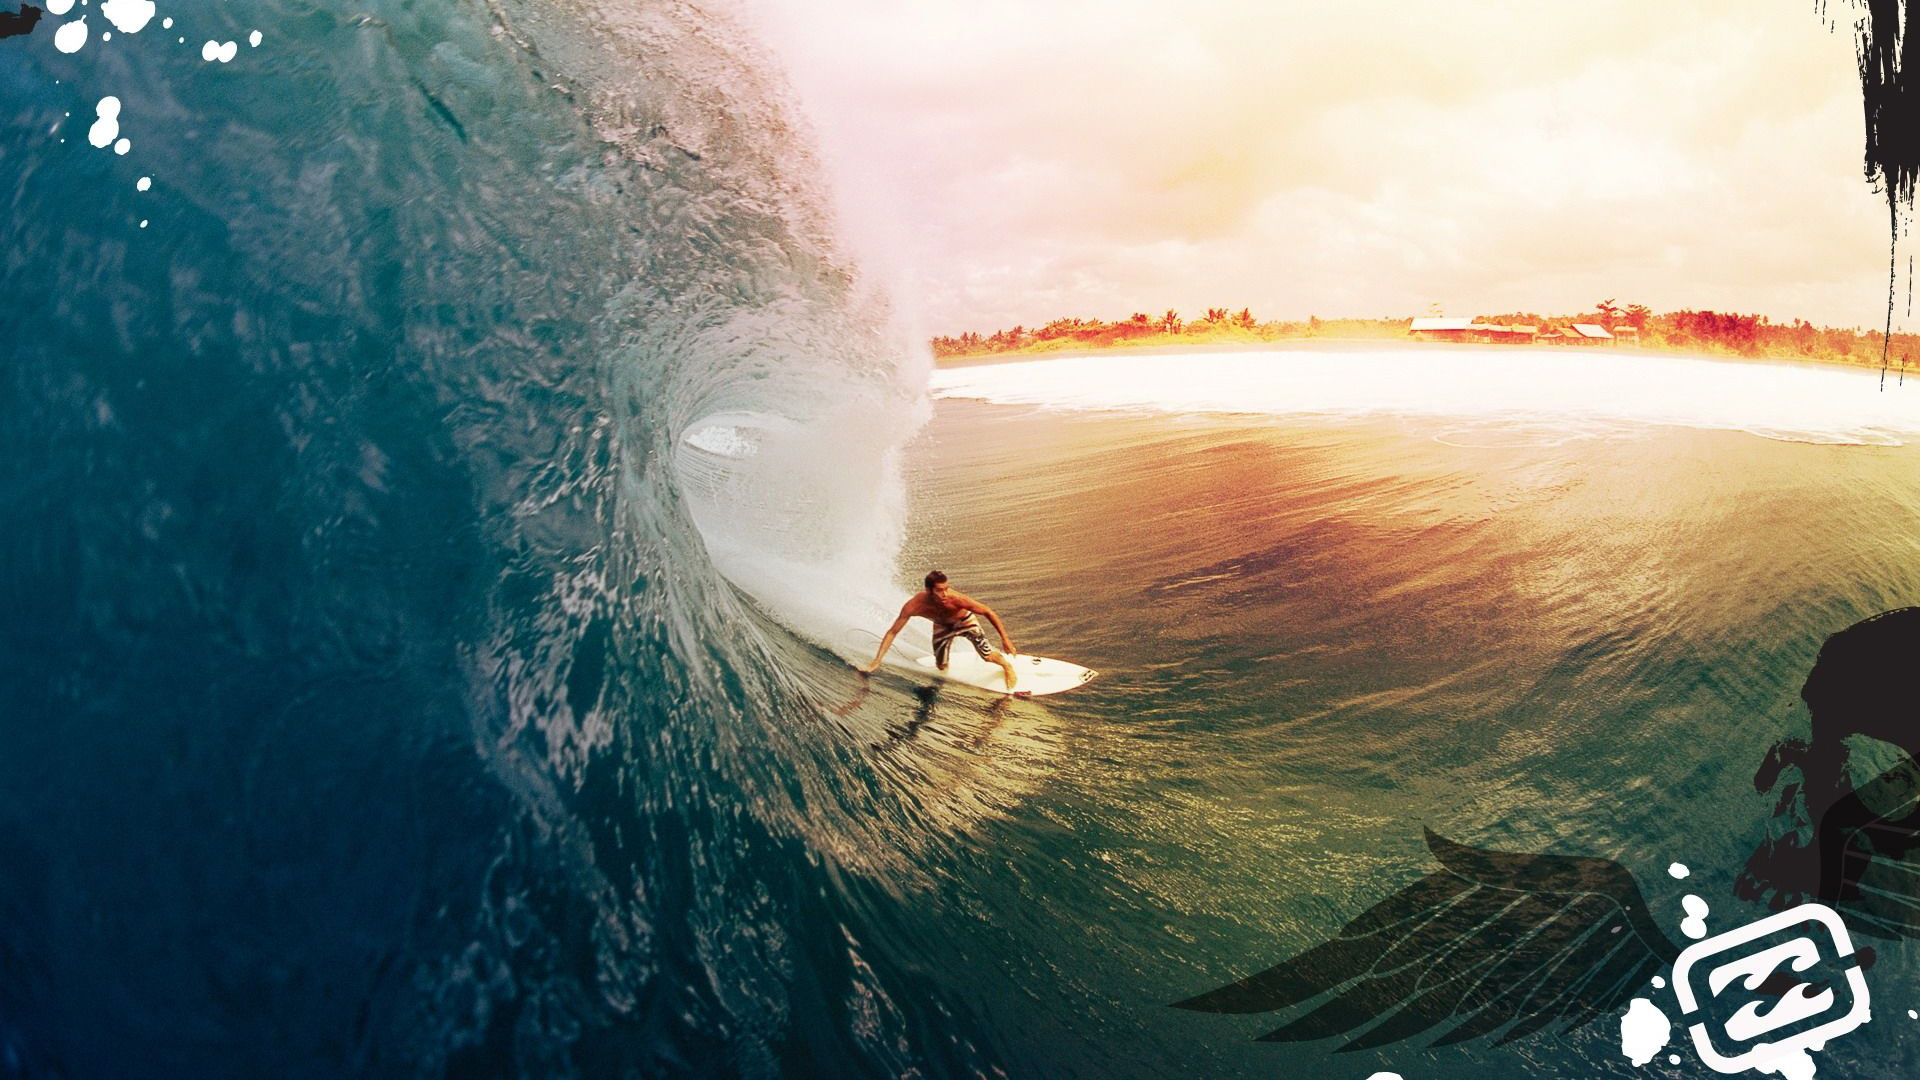 Awesome surf surfing widescreen high definition wallpaper for